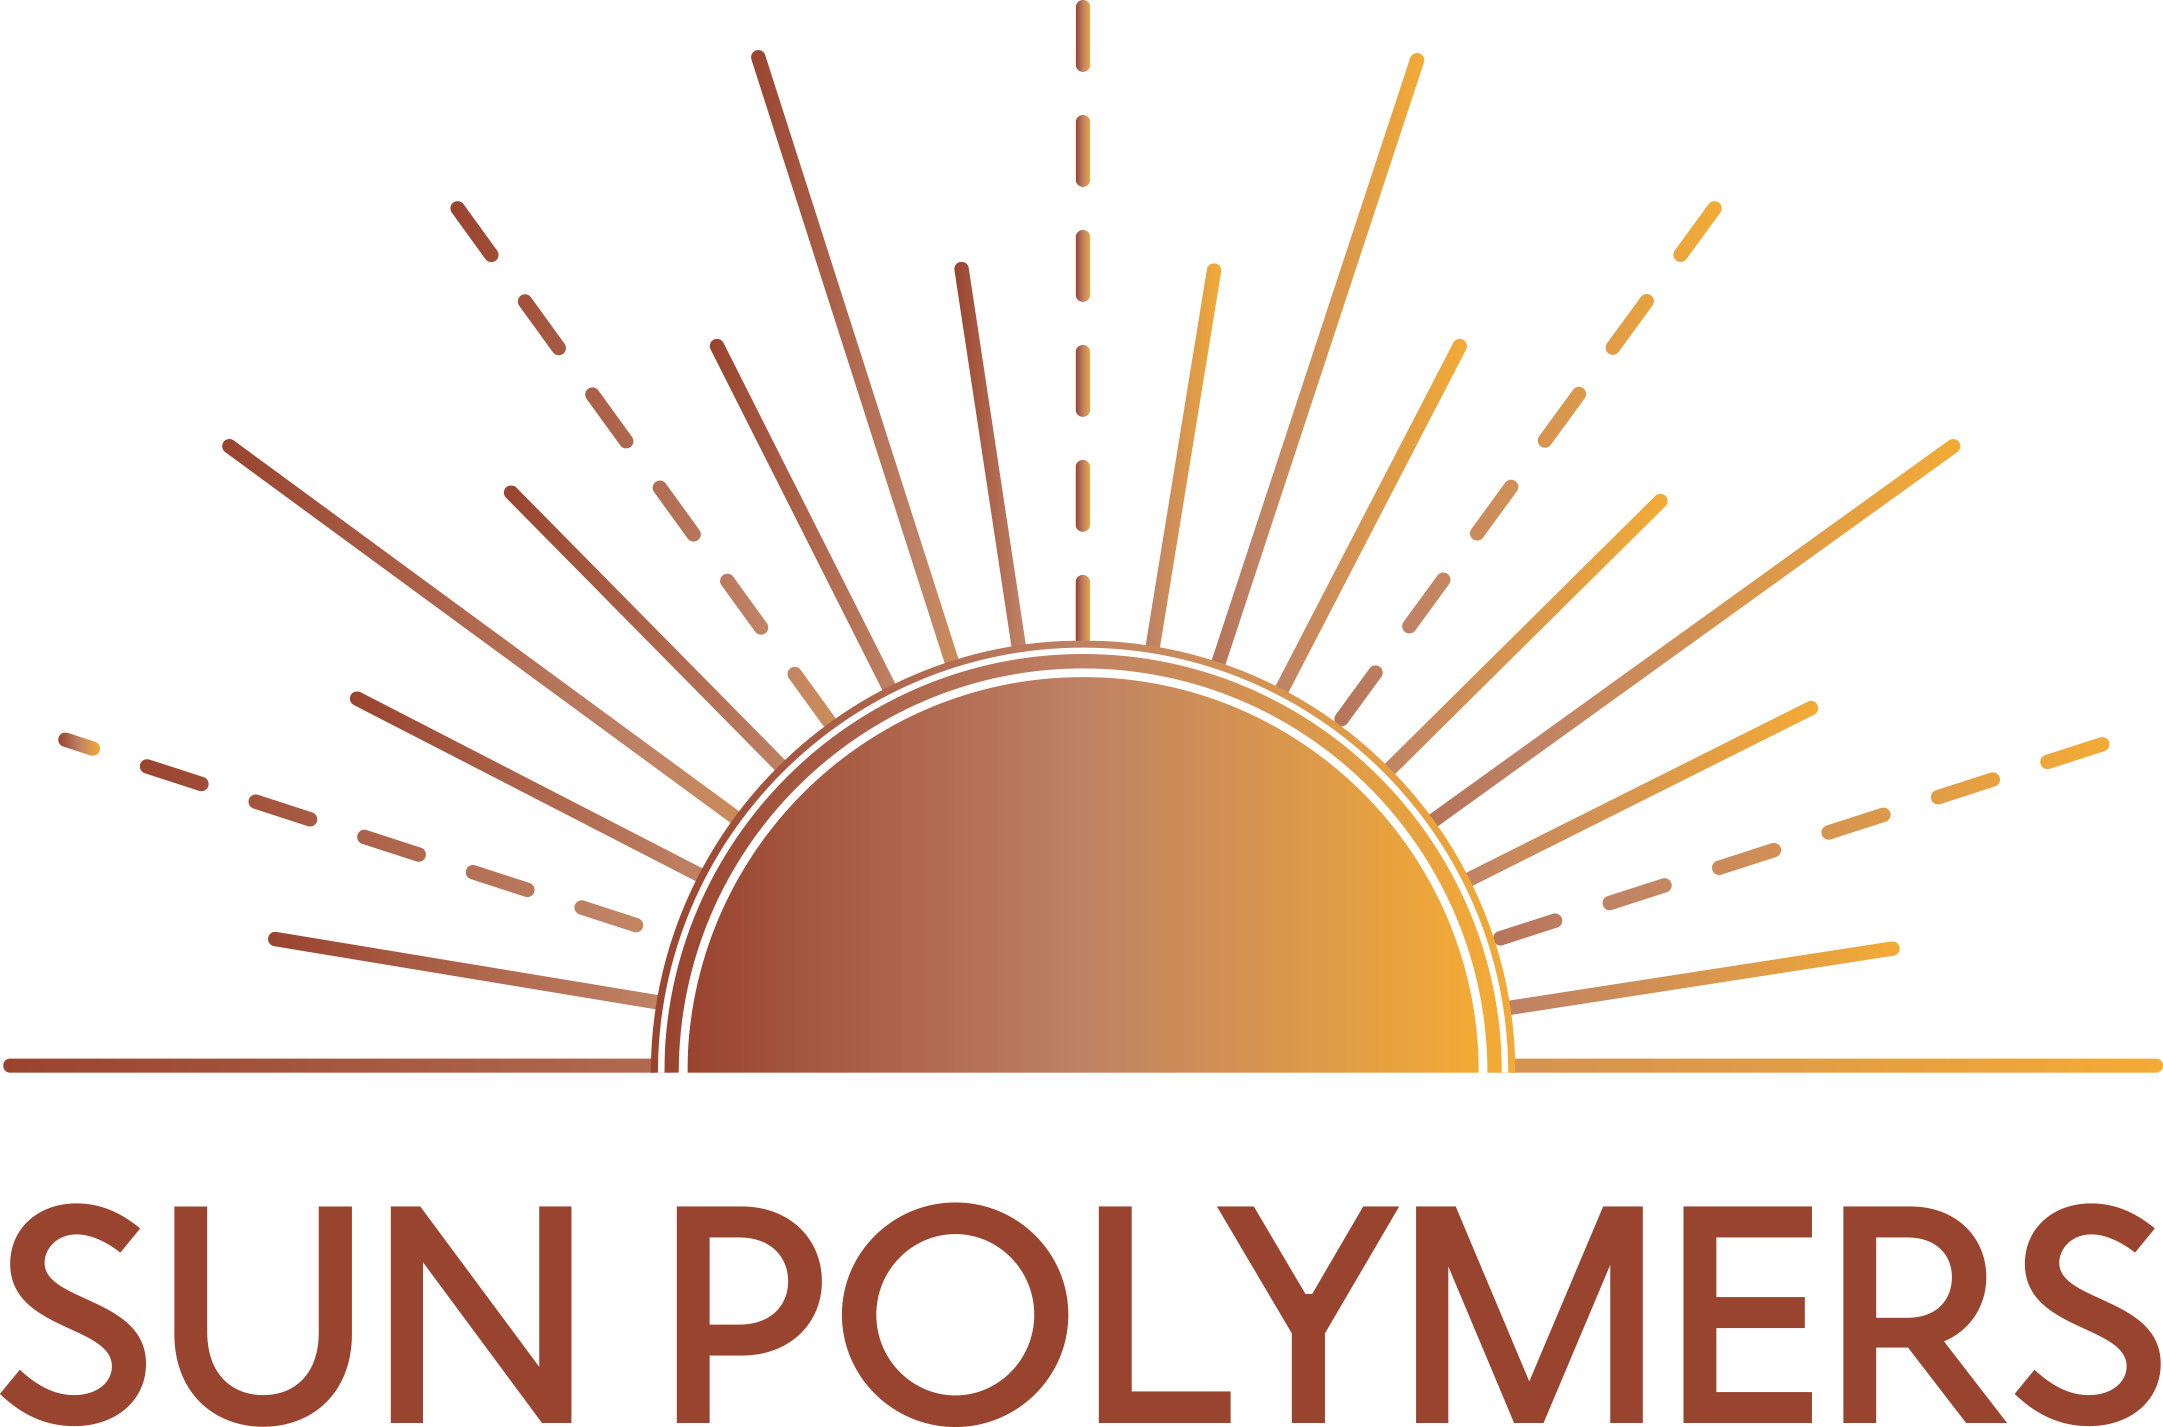 The Sun Polymers